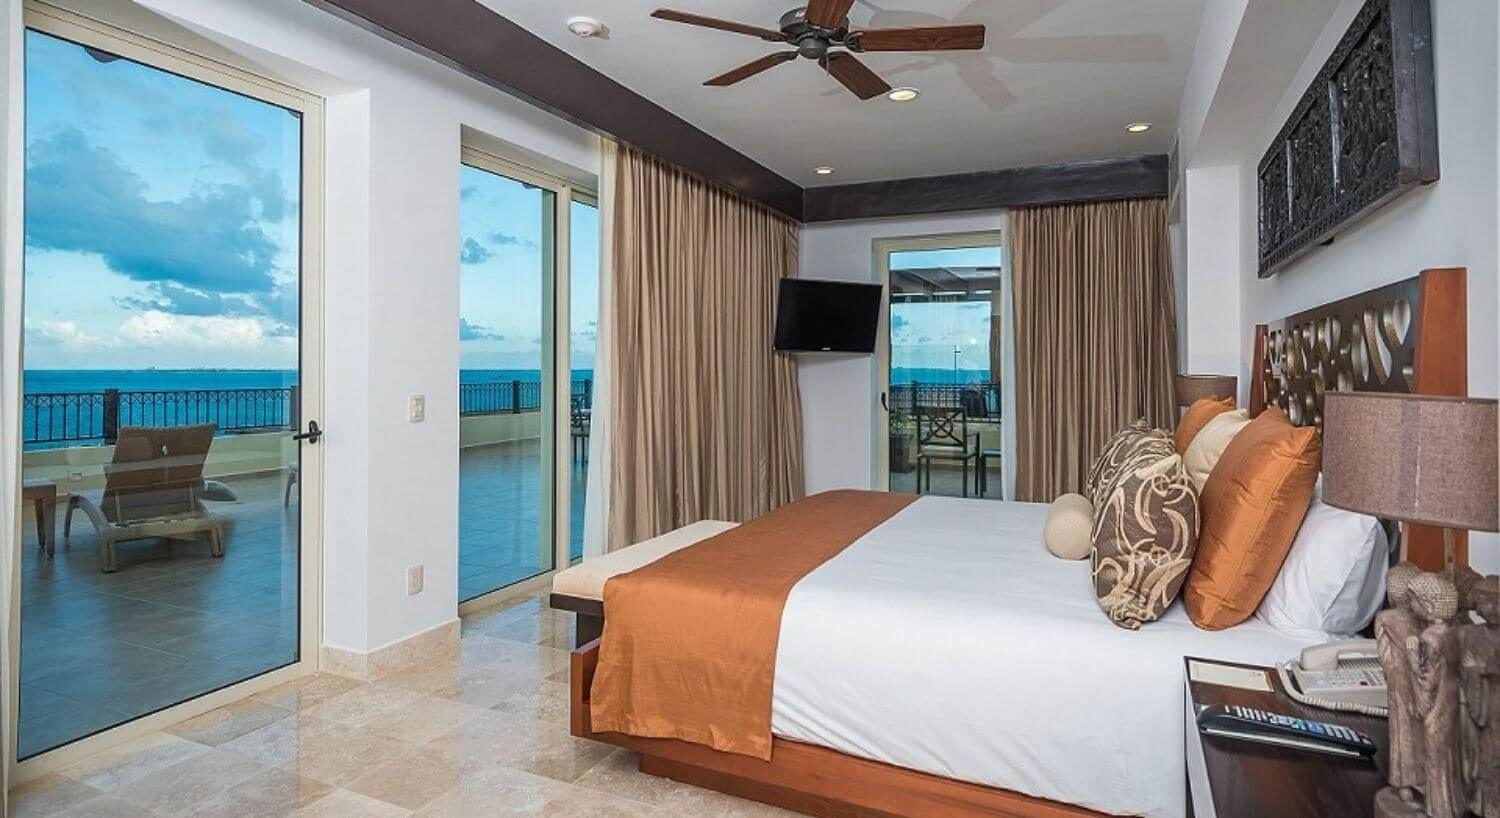 A bedroom with a King bed with white, orange and brown bedding, several sliding glass doors leading out to an expansive wrap around terrace with patio furniture and ocean views.